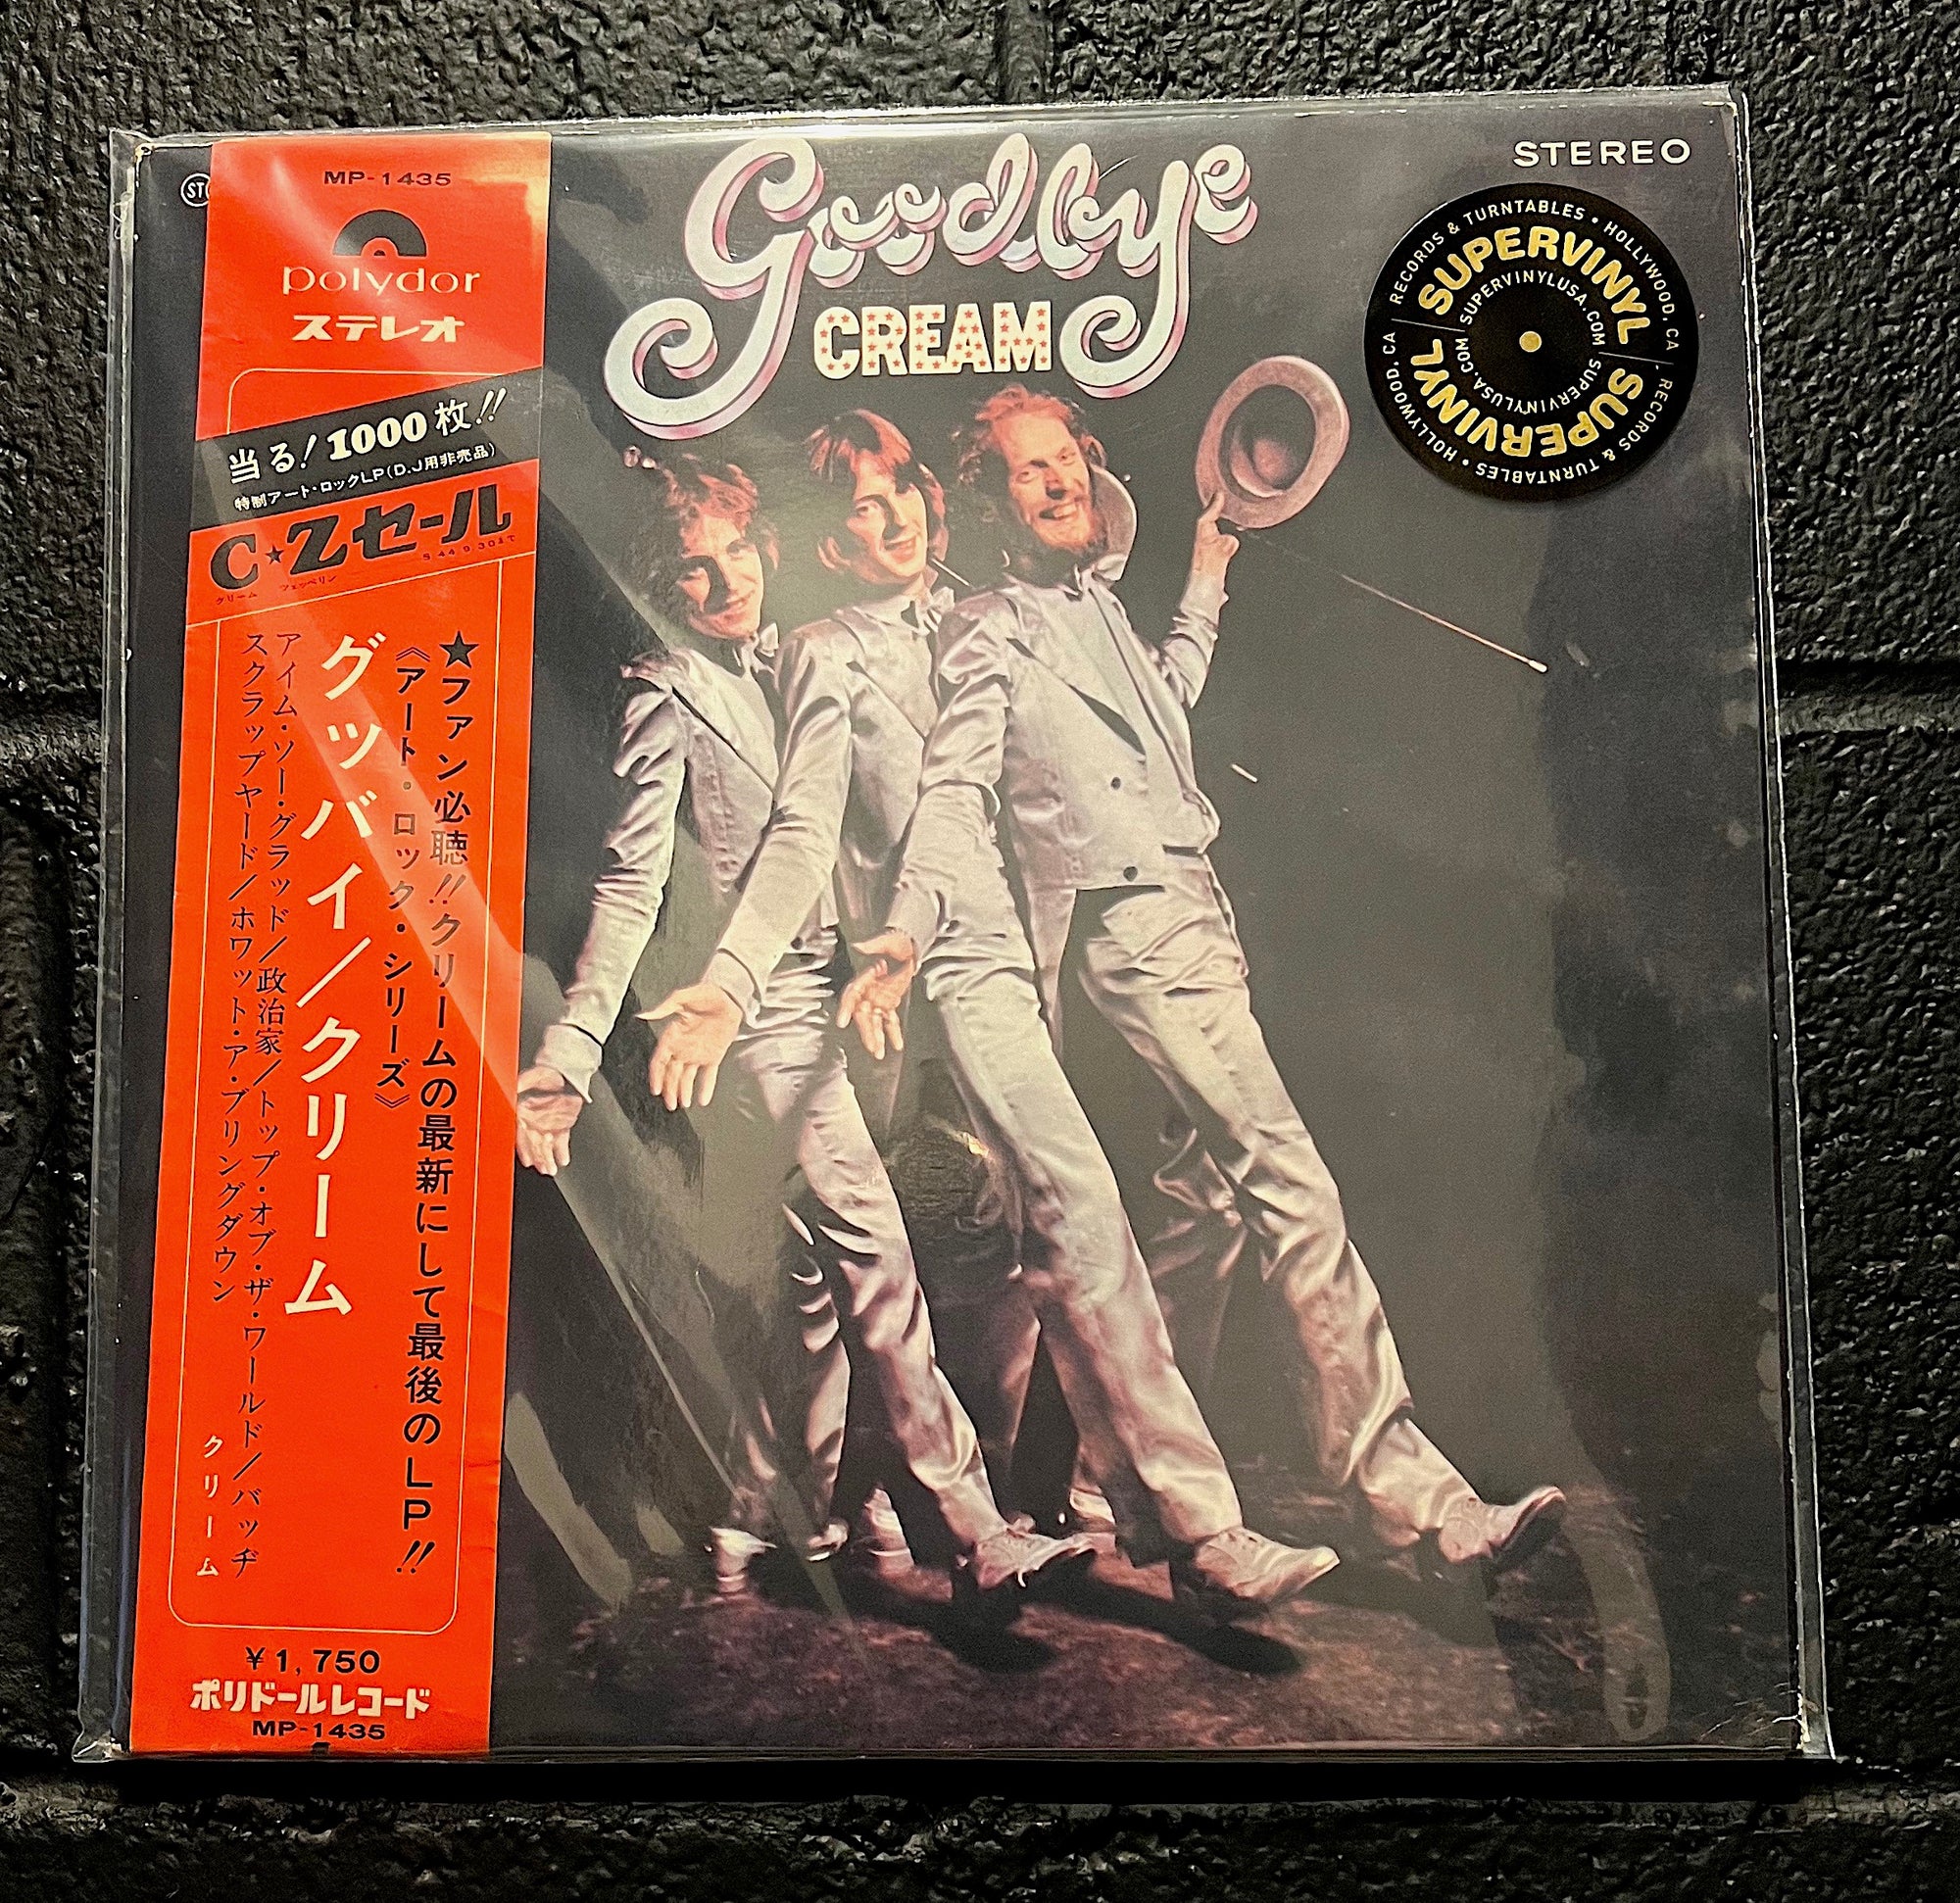 Goodbye 1969 Japan white label promotional LP with obi